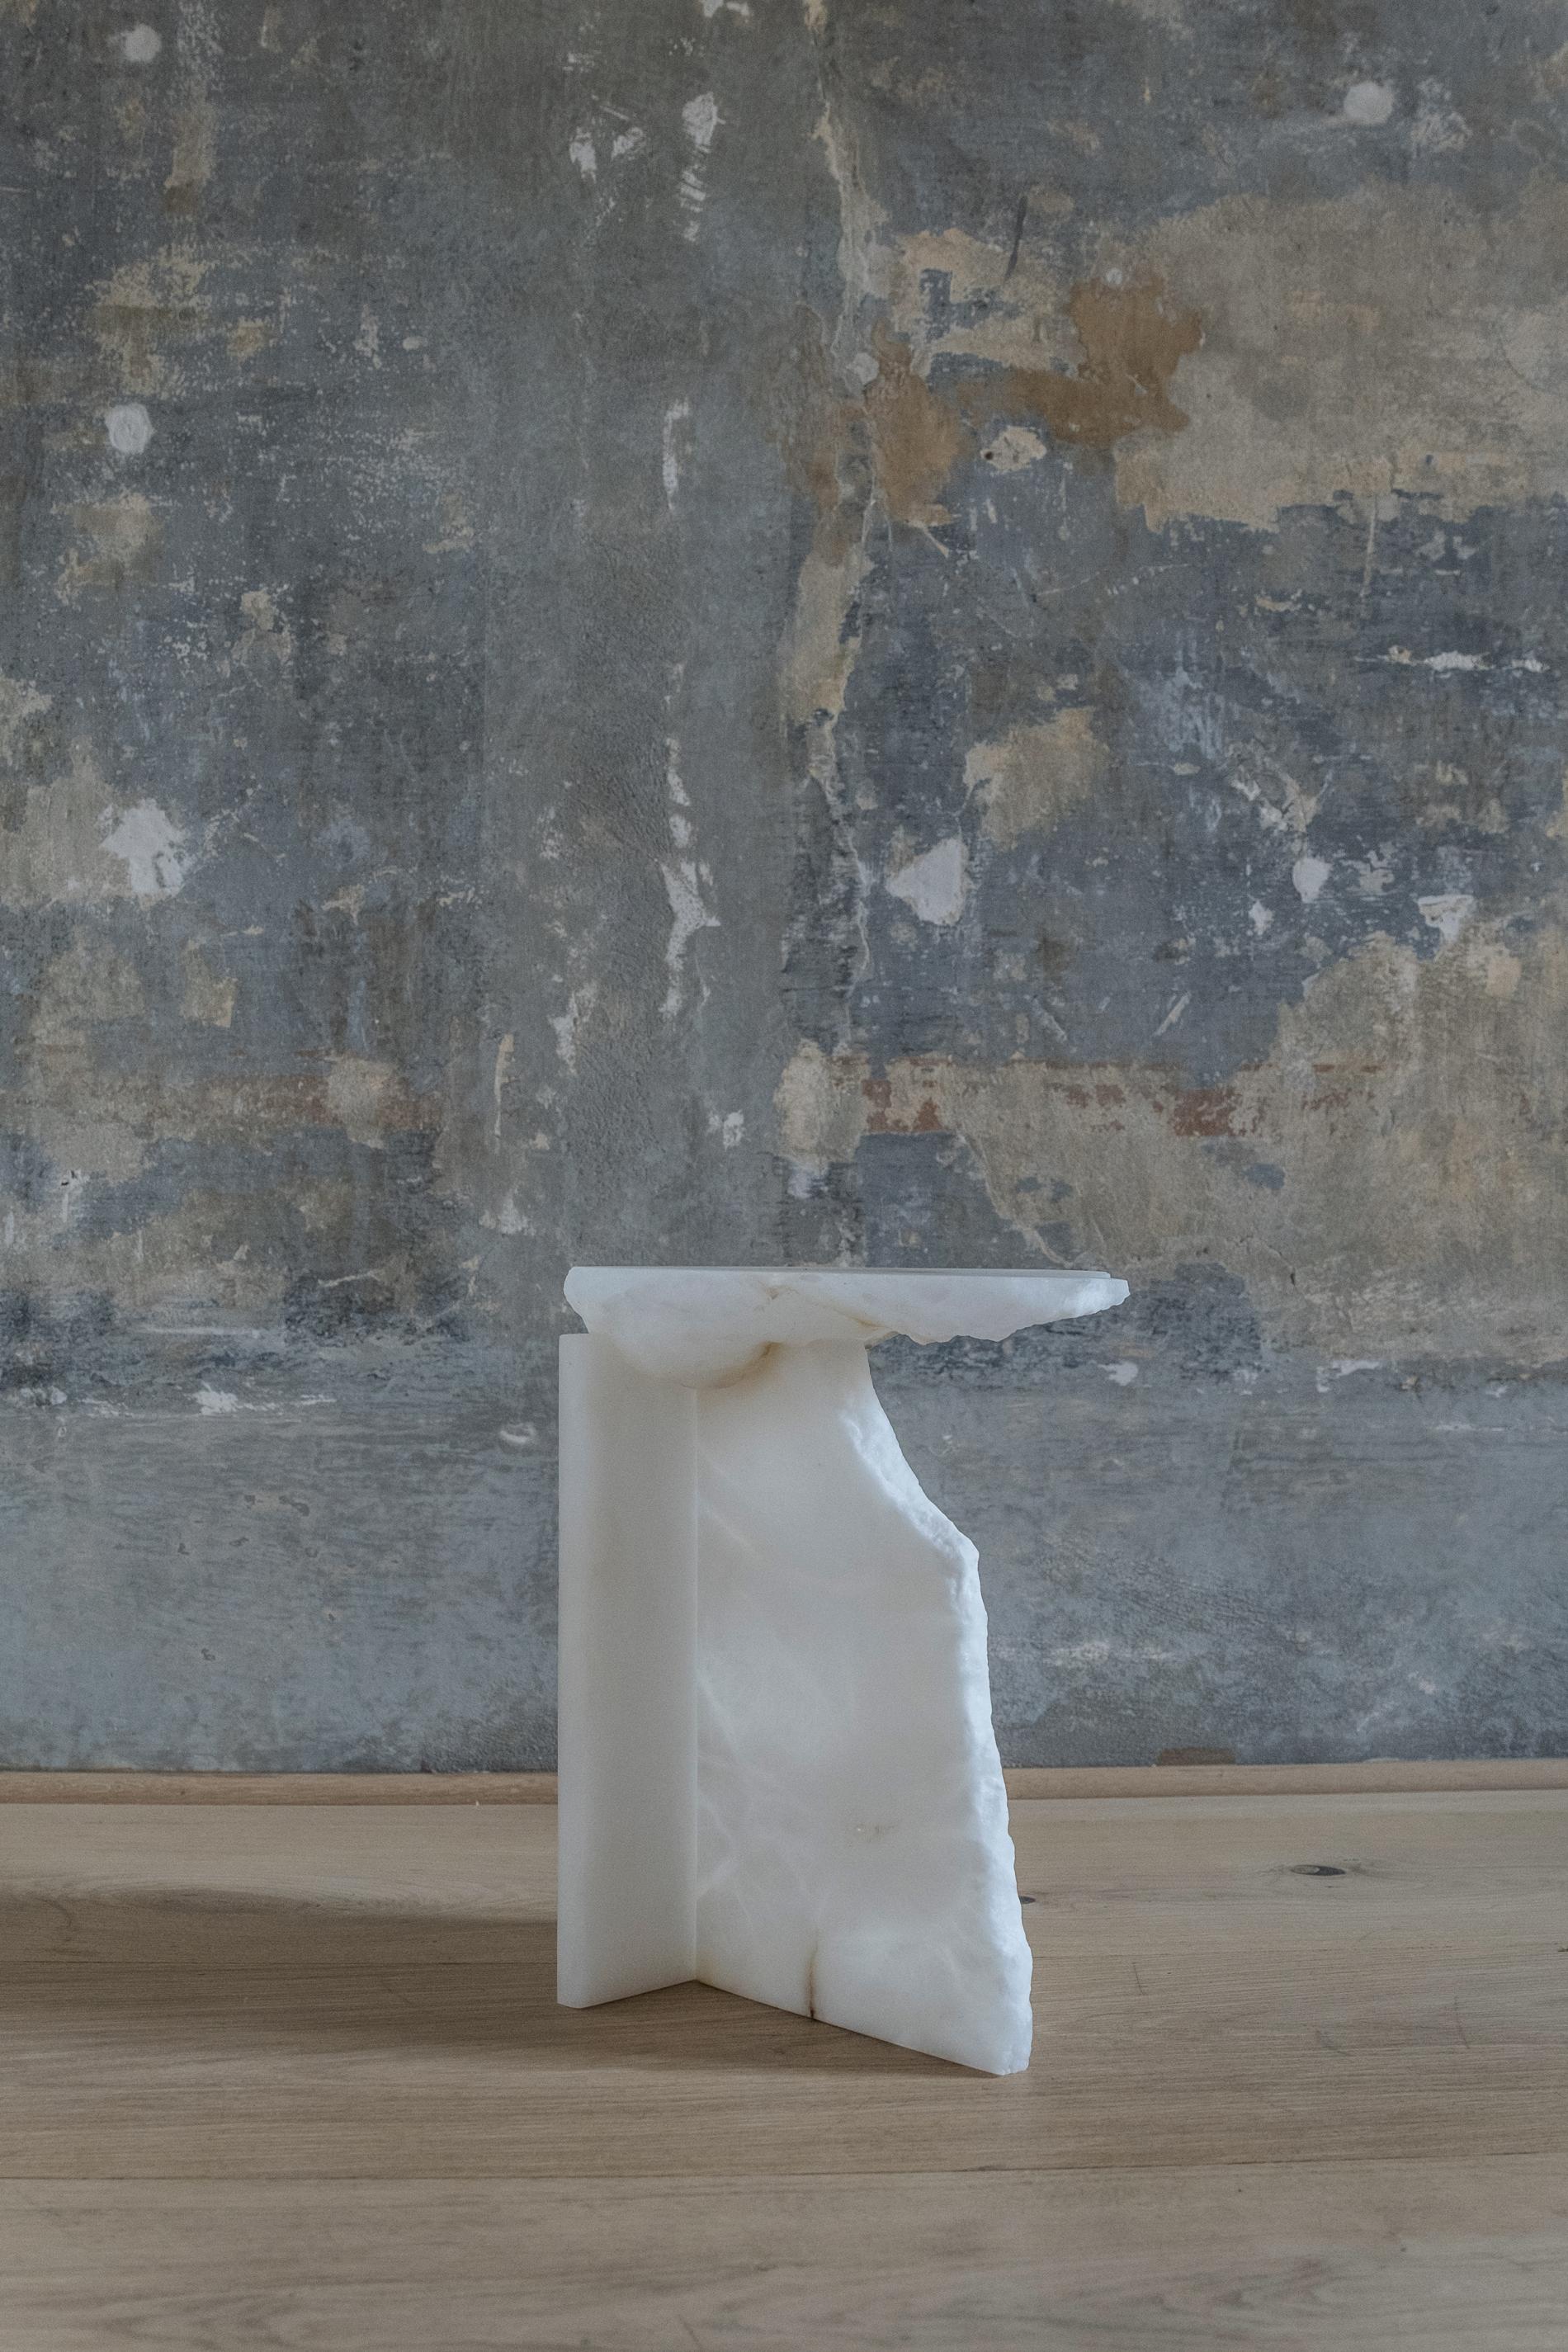 K2301 Fragmenta Side Table by Isac Elam Kaid
Limited Edition of 20 + 2AP pieces.
Dimensions: W 33 x D 30 x H 45 cm.
Materials: White onyx.

Custom dimensions available on request. Please contact us.

Crafted during residency with Galerie